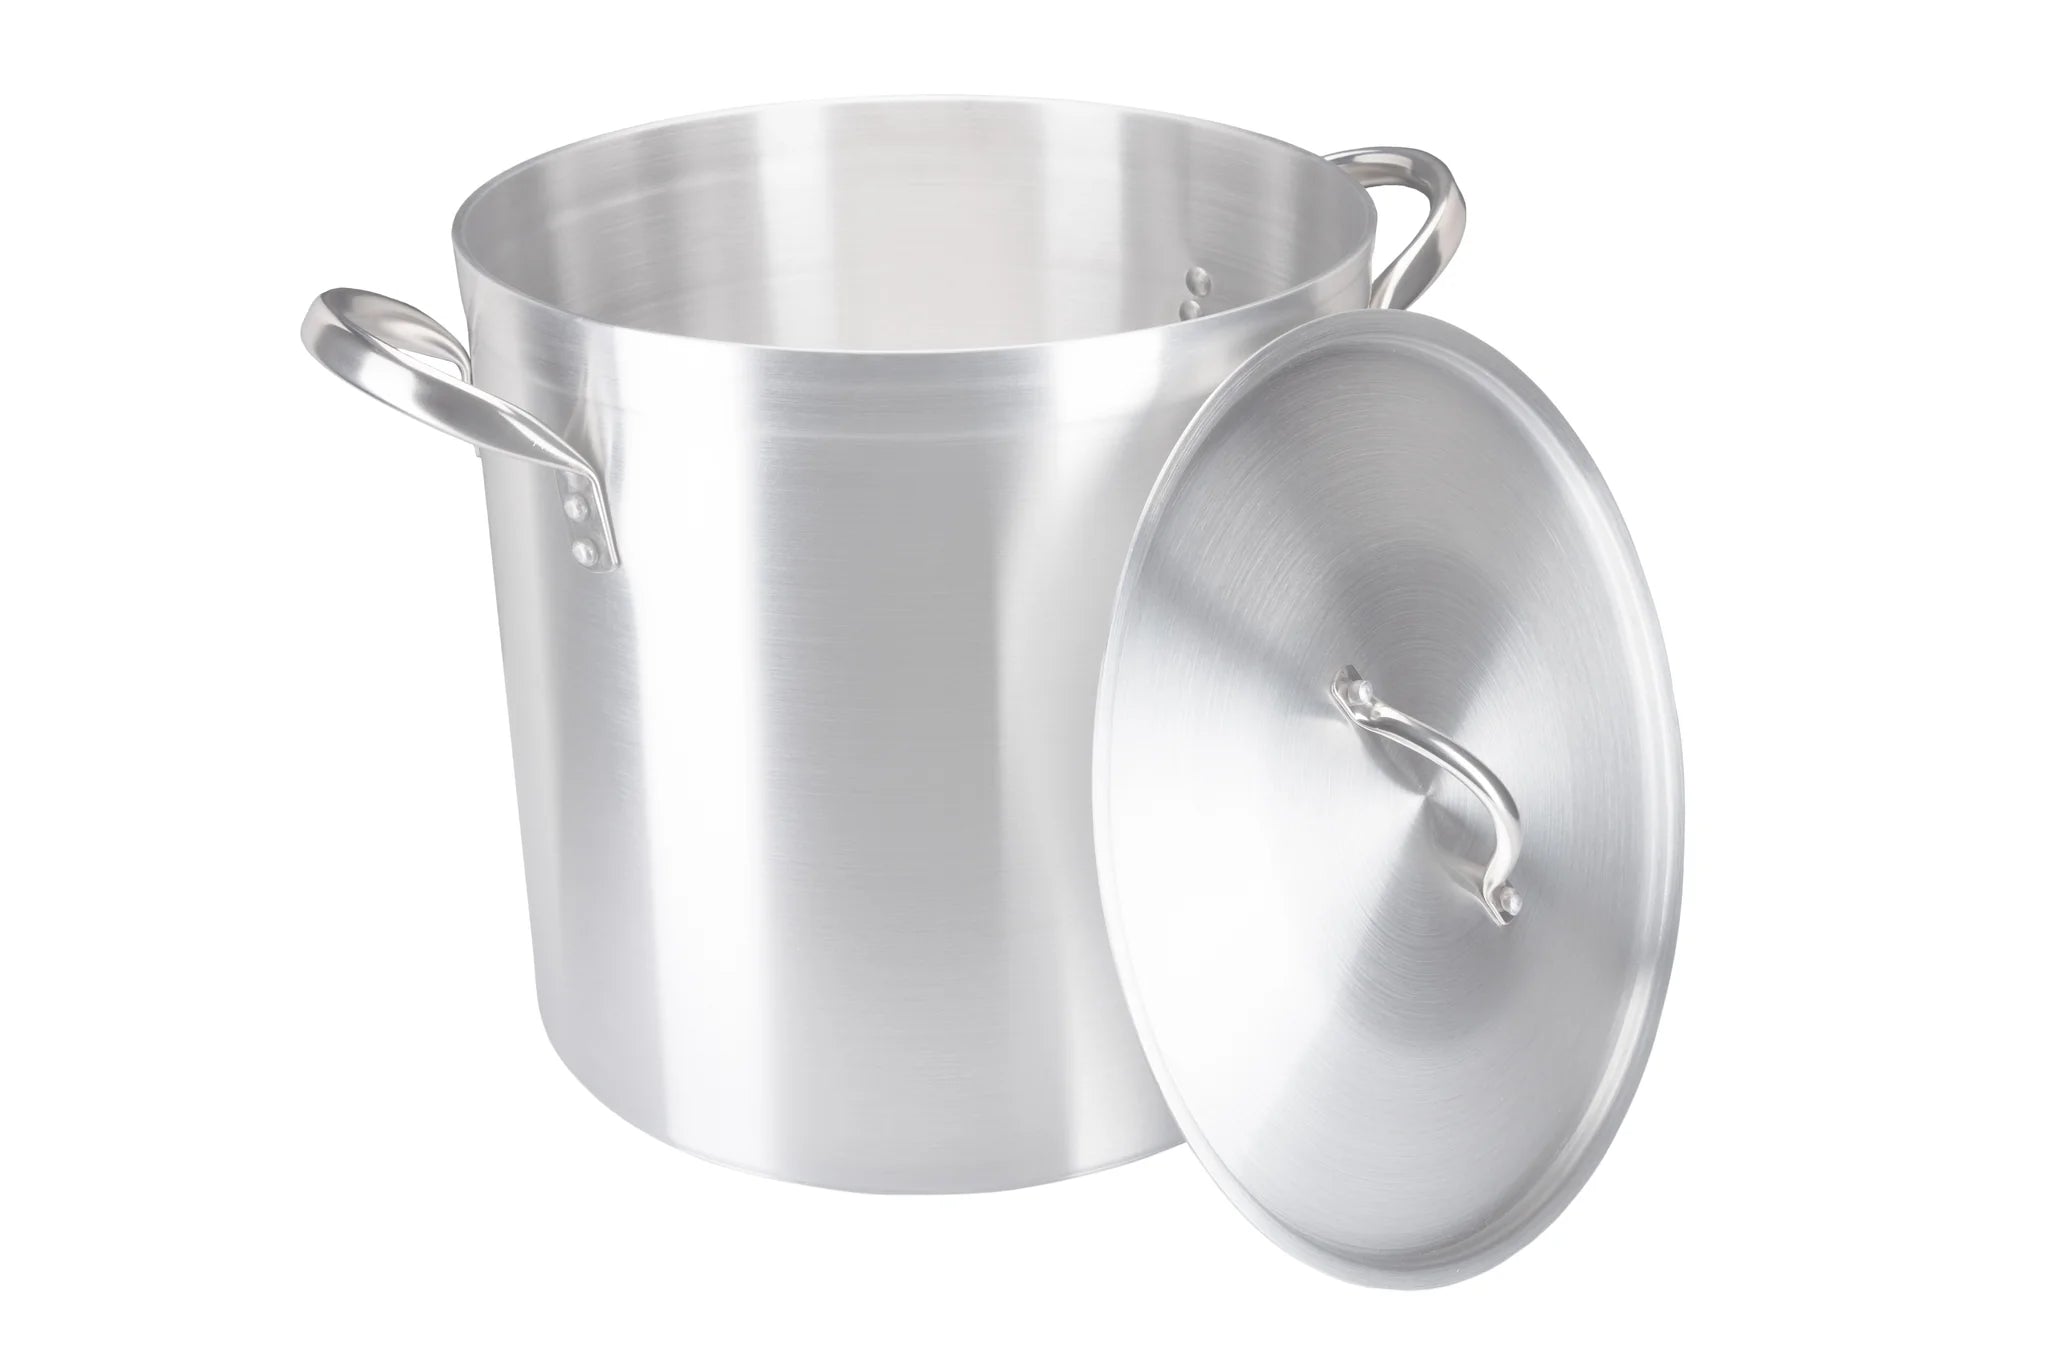 51cm Aluminium 75 LITRE Stockpot.Product Ref:00830. IN STOCK -🚚 1-3 Days Delivery